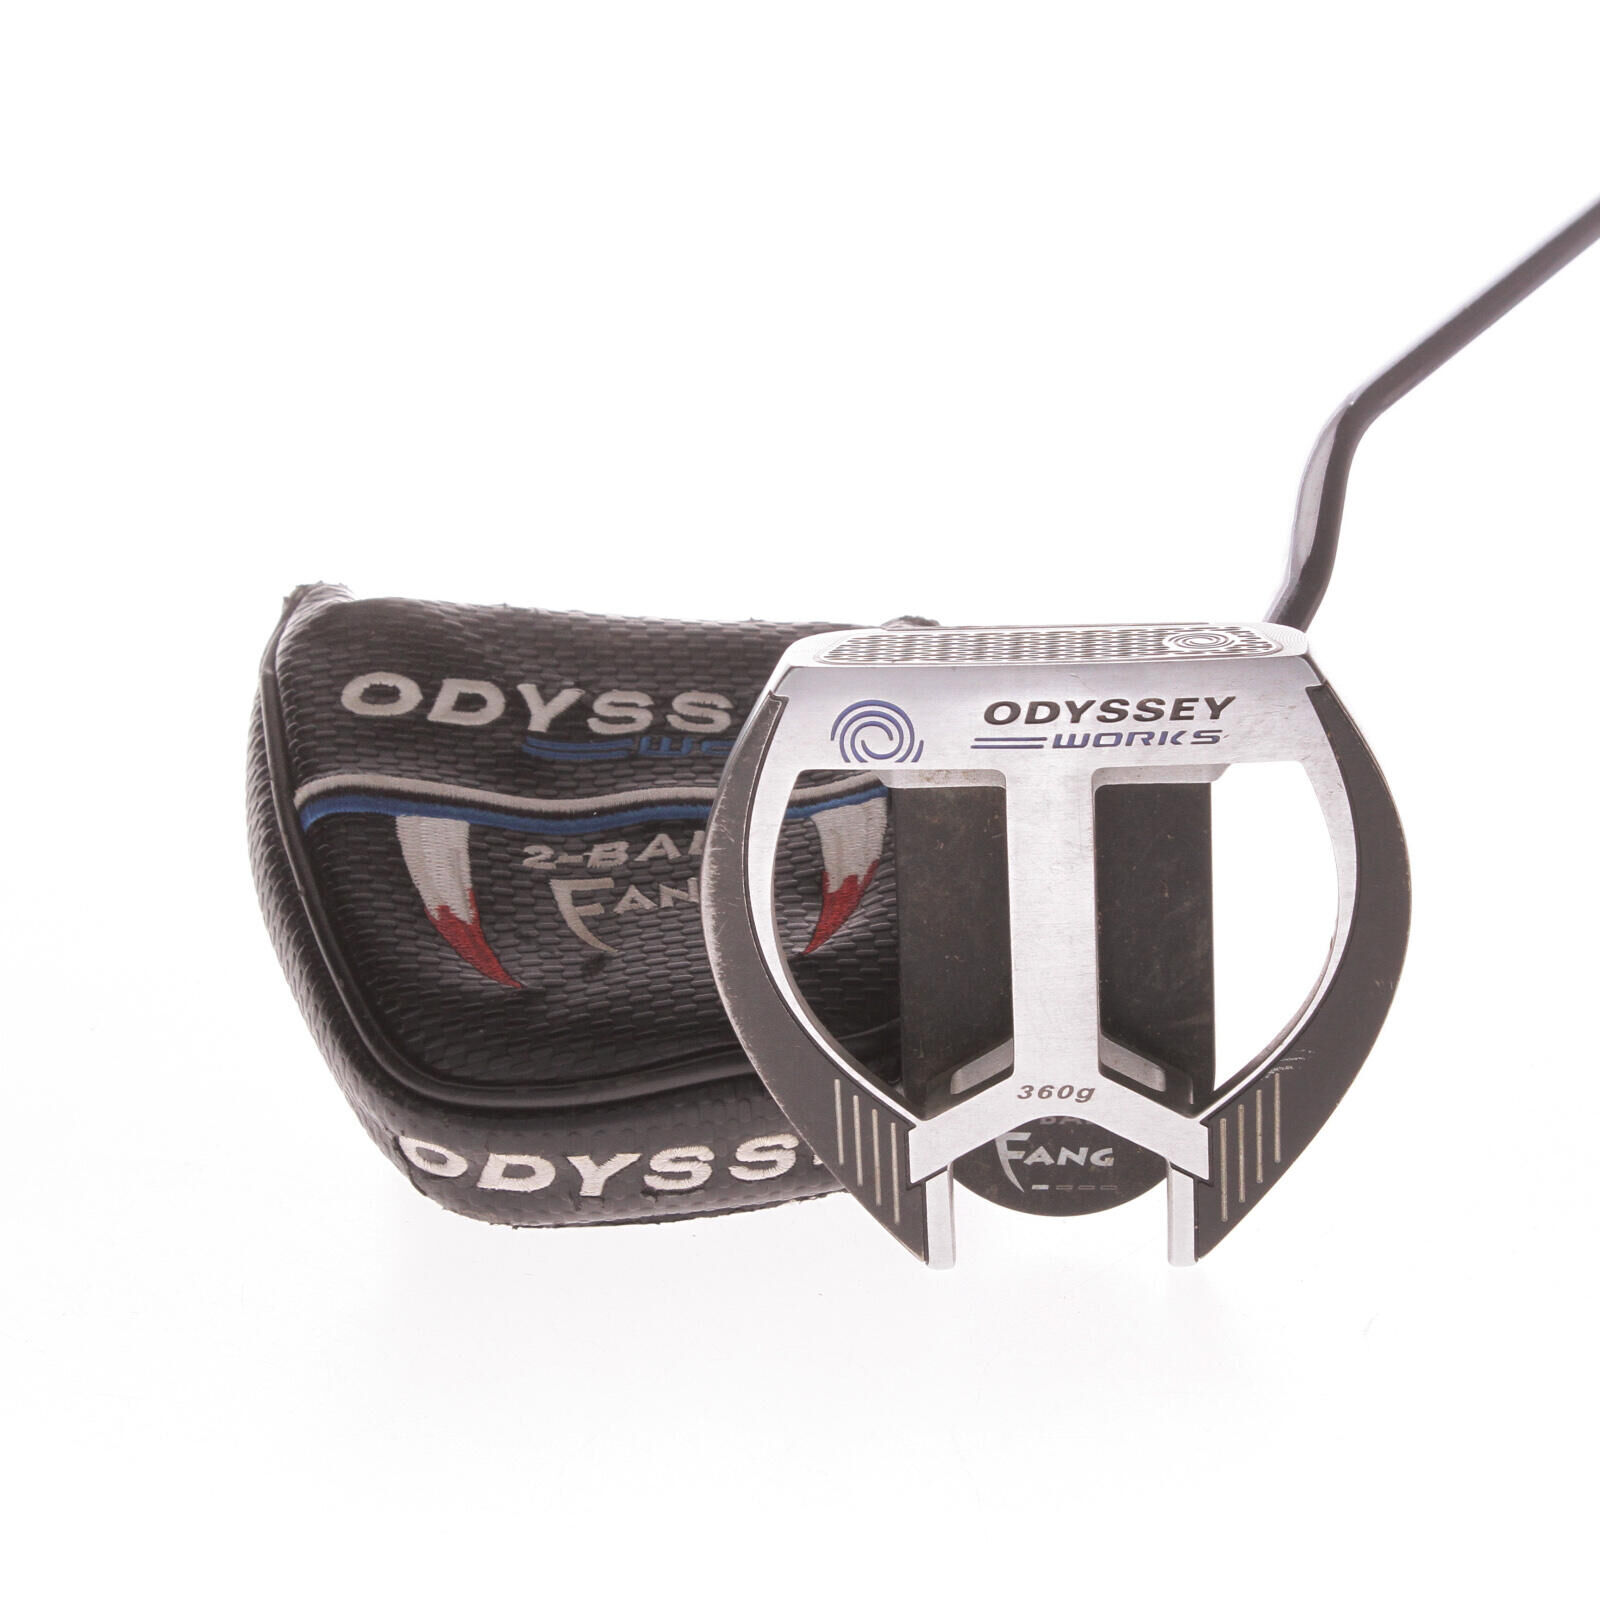 ODYSSEY USED - Odyssey 2 Ball Fang Putter Steel Shaft Right Handed - GRADE C